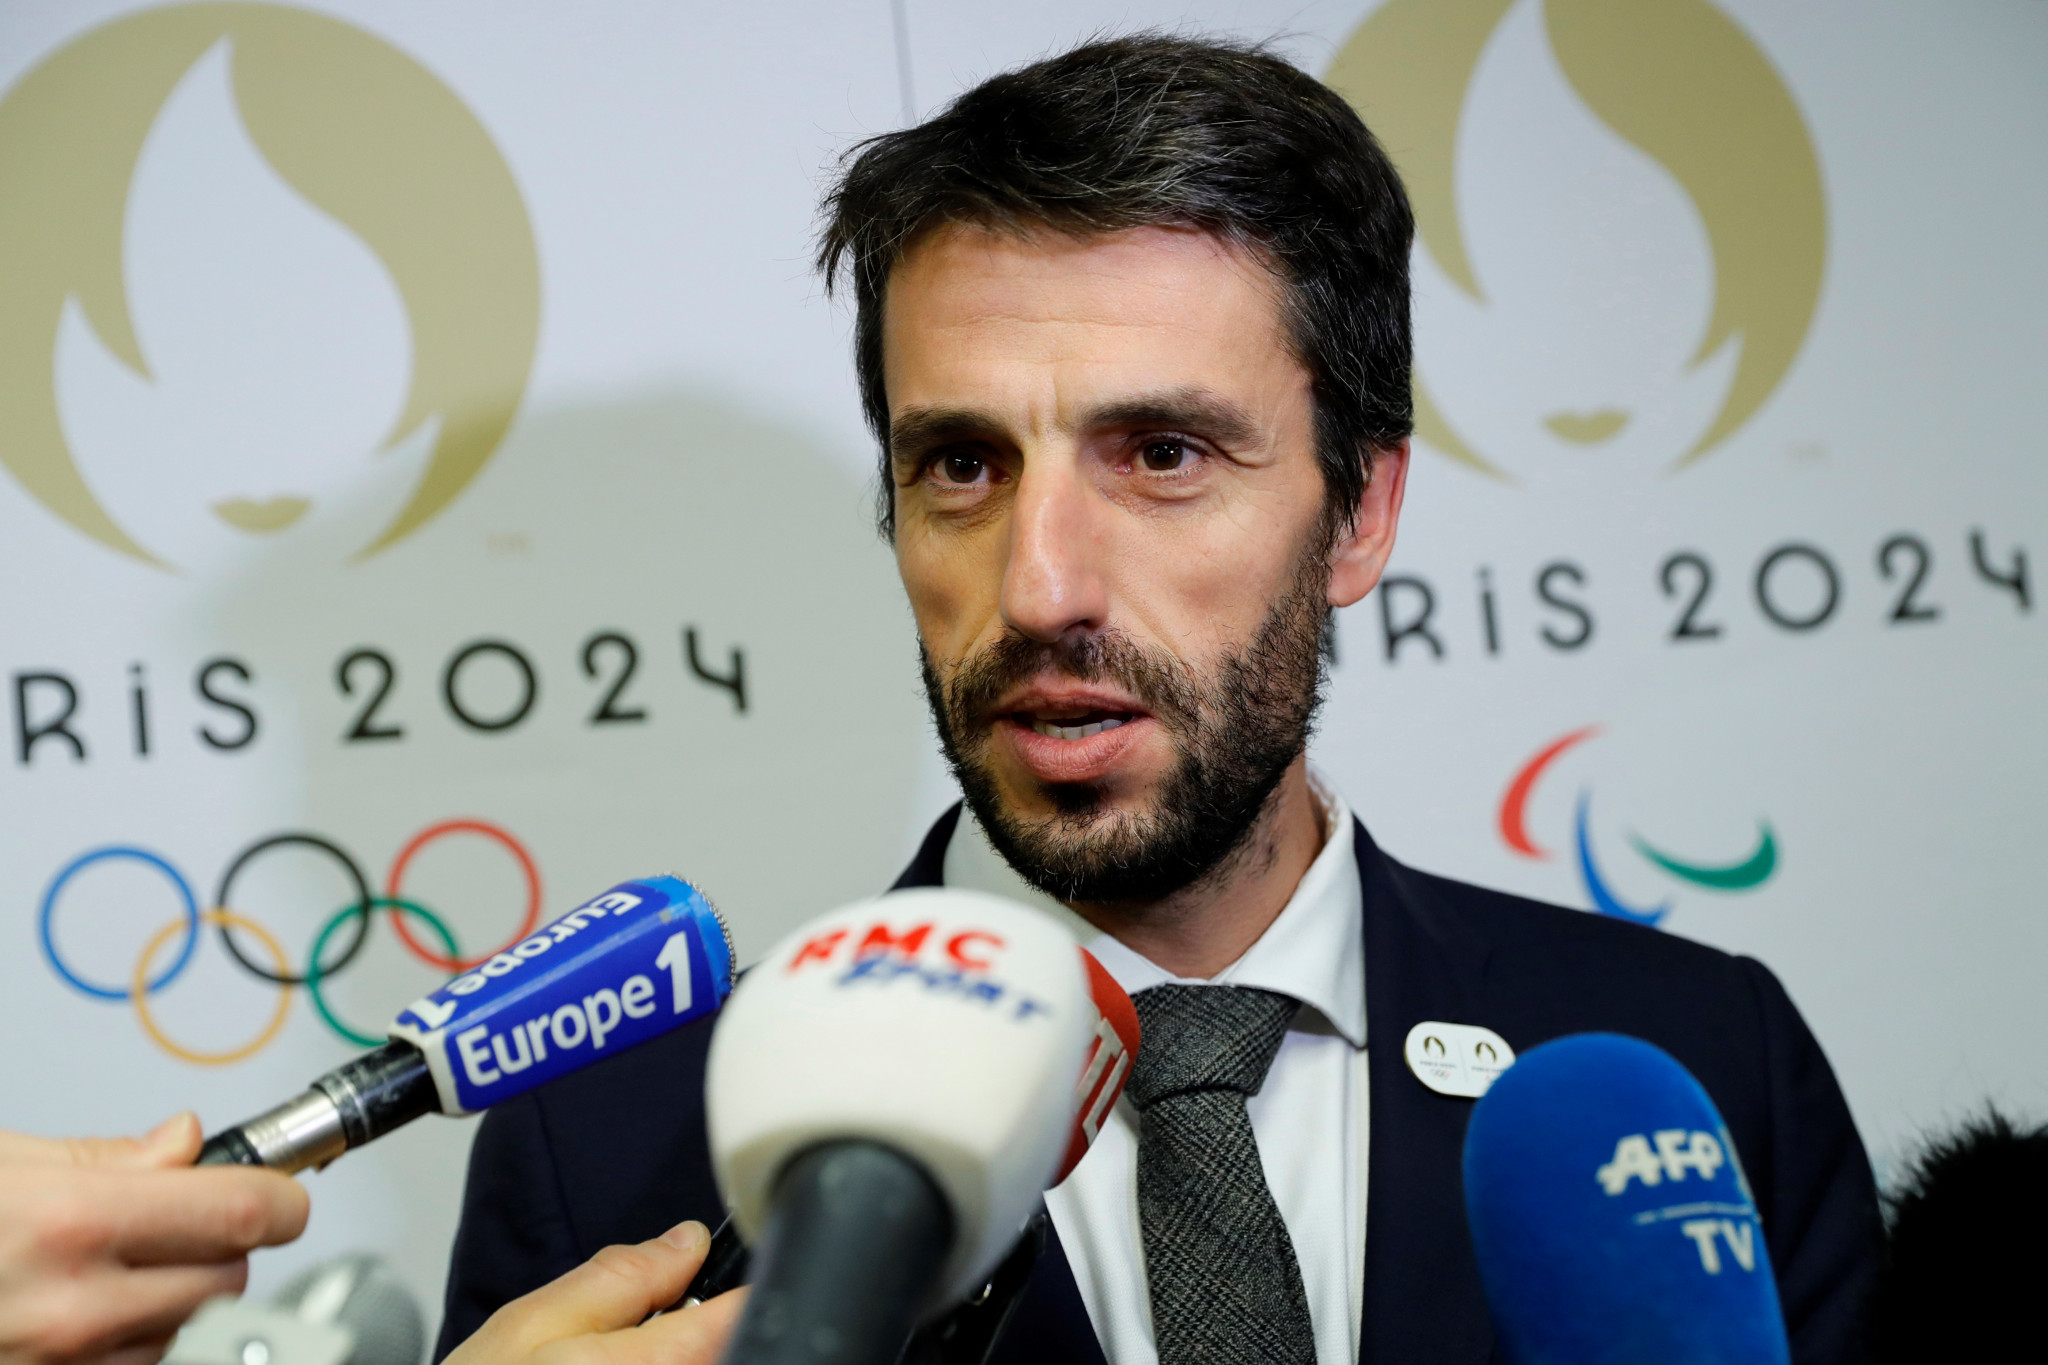 Paris 2024 President Tony Estanguet will be among the speakers at the two-day event ©Getty Images